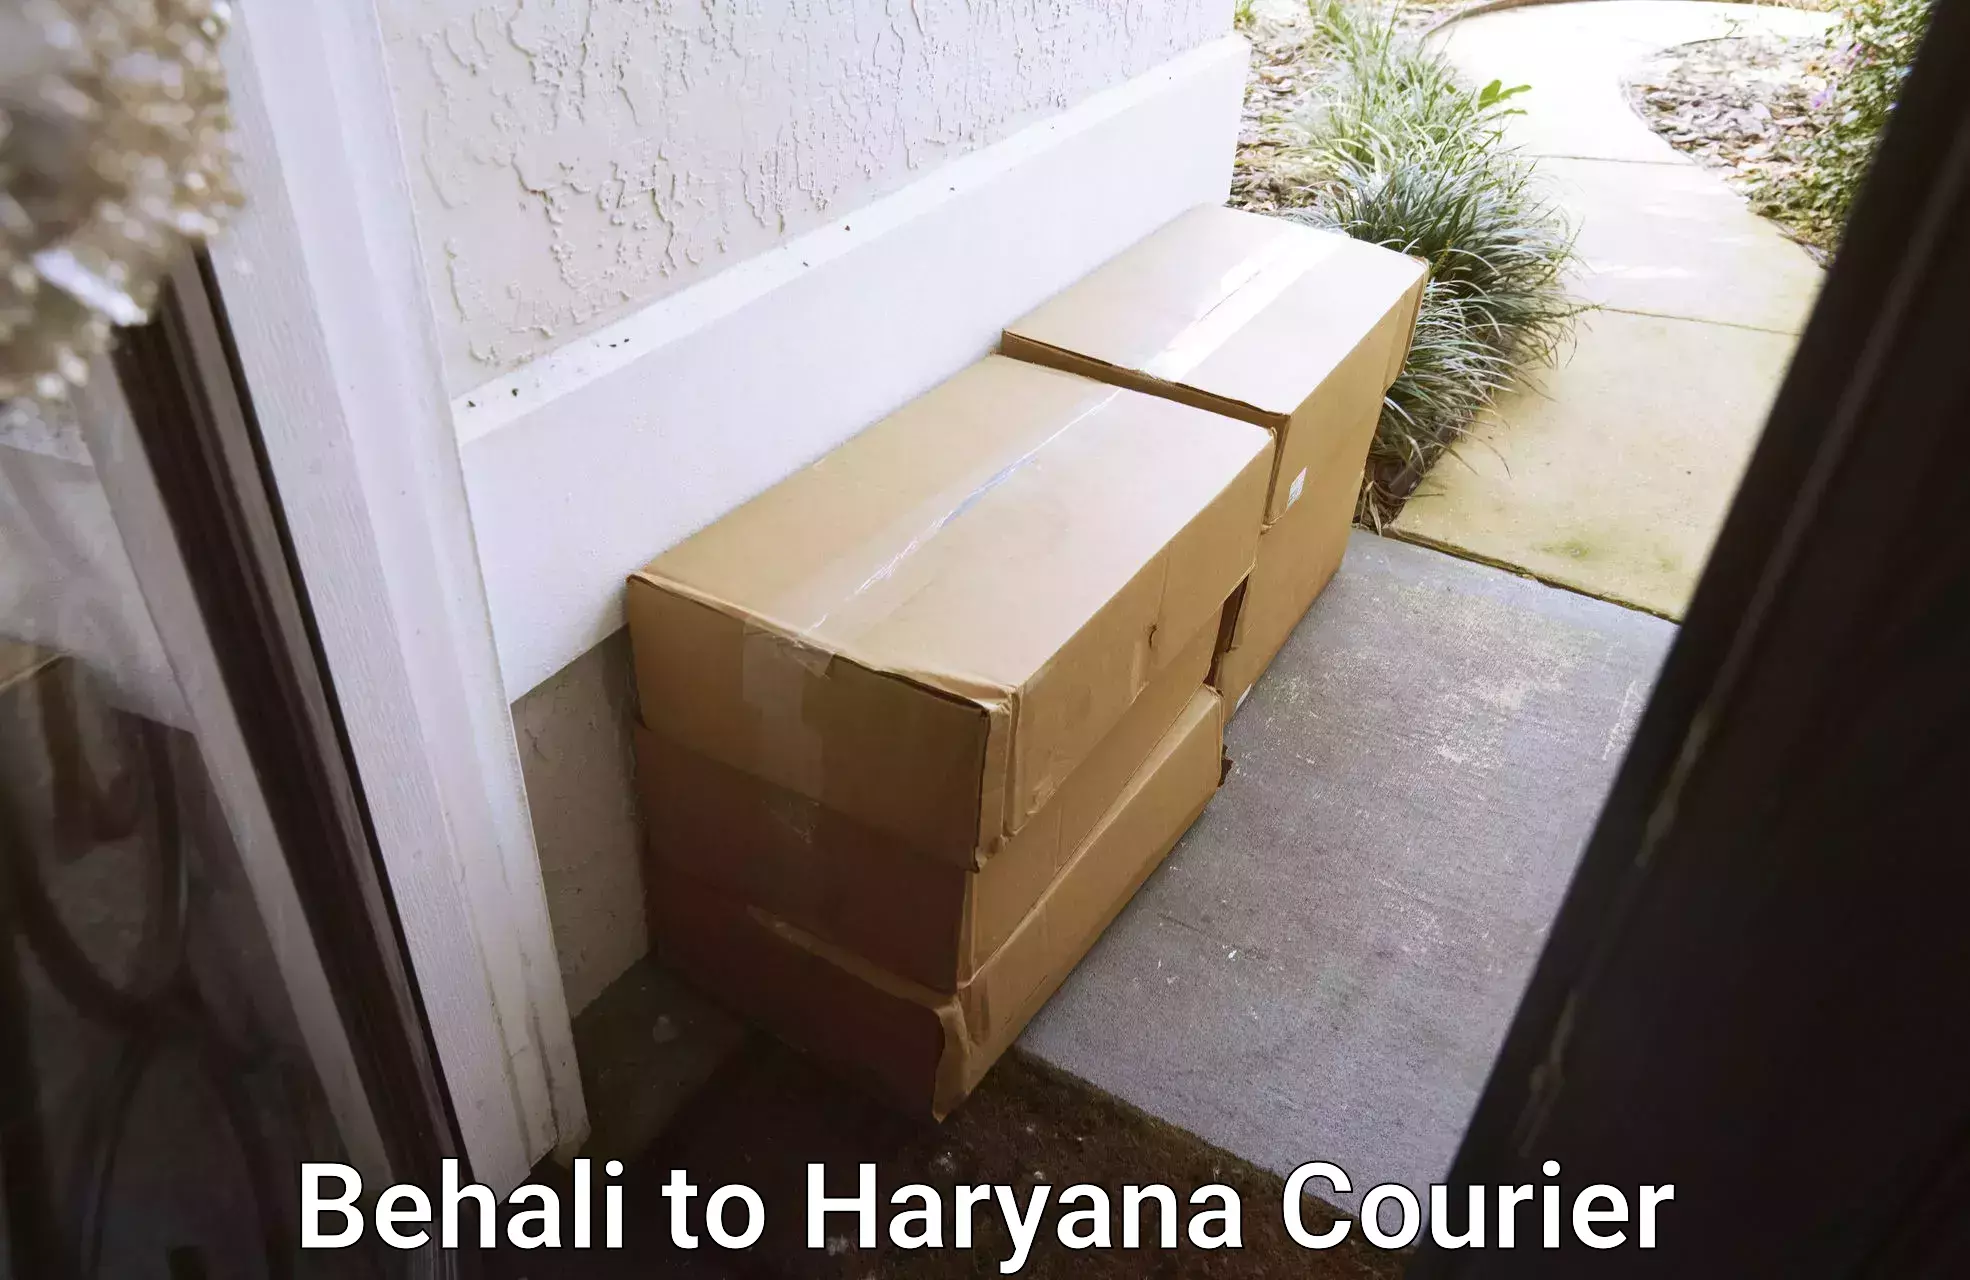 Cargo courier service Behali to Chaudhary Charan Singh Haryana Agricultural University Hisar